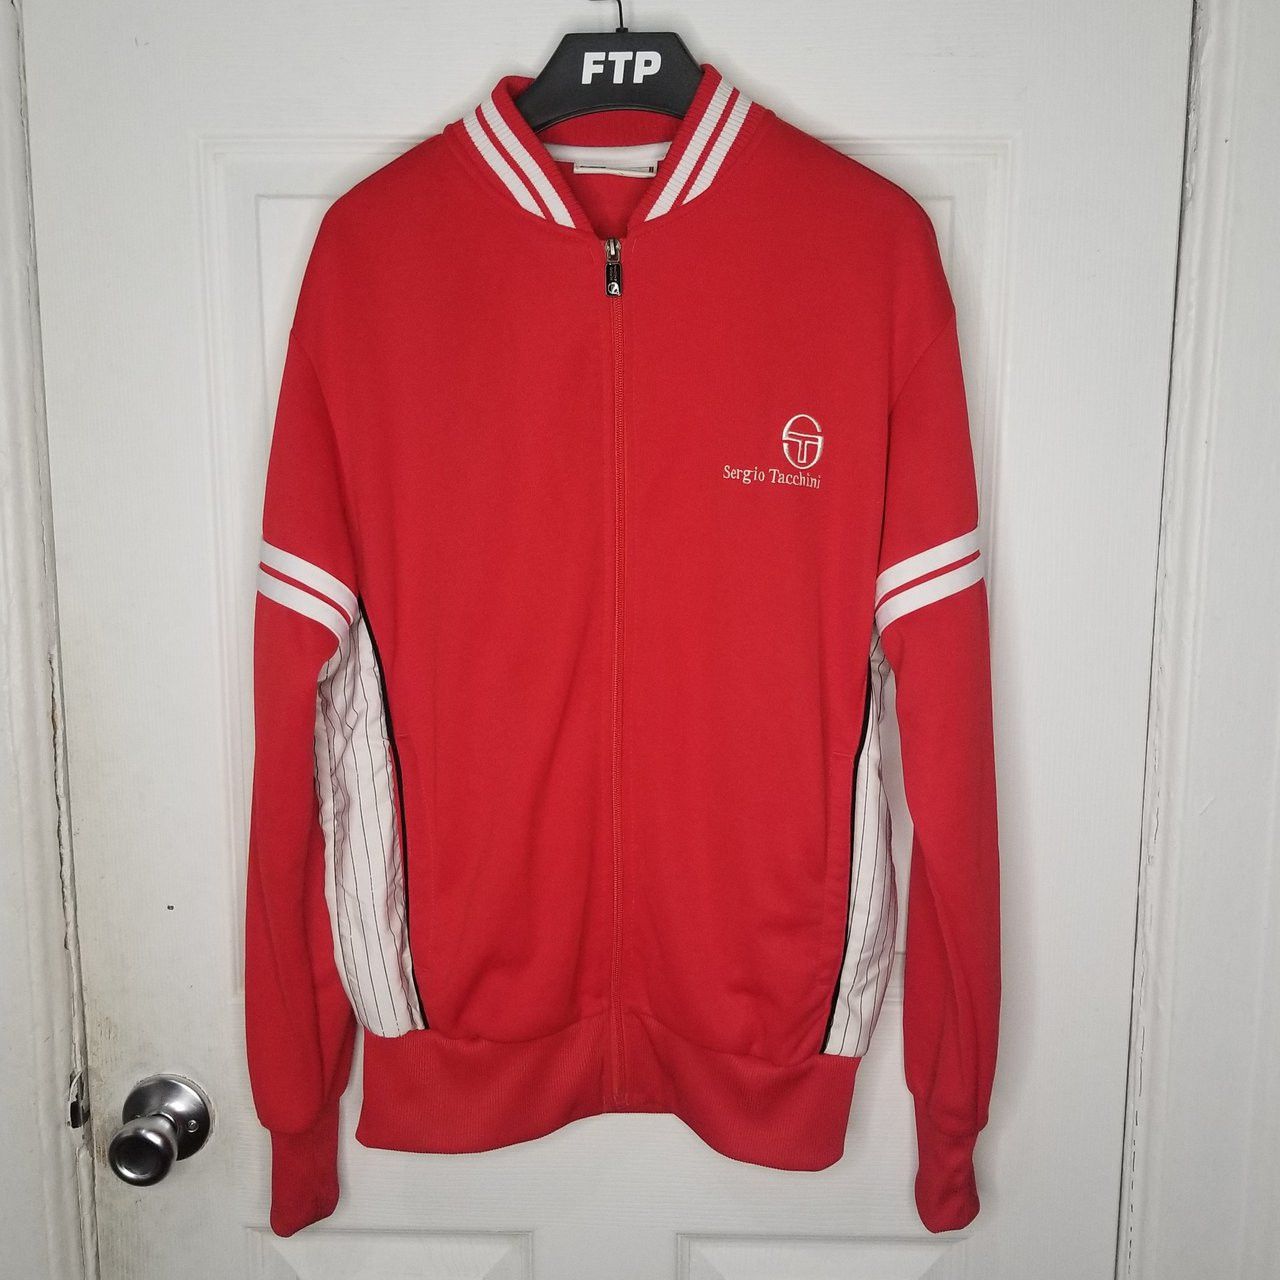 Vintage VTG Sergio Tacchini Embroidered Logo Zip Up Track Jacket Size US S / EU 44-46 / 1 - 1 Preview